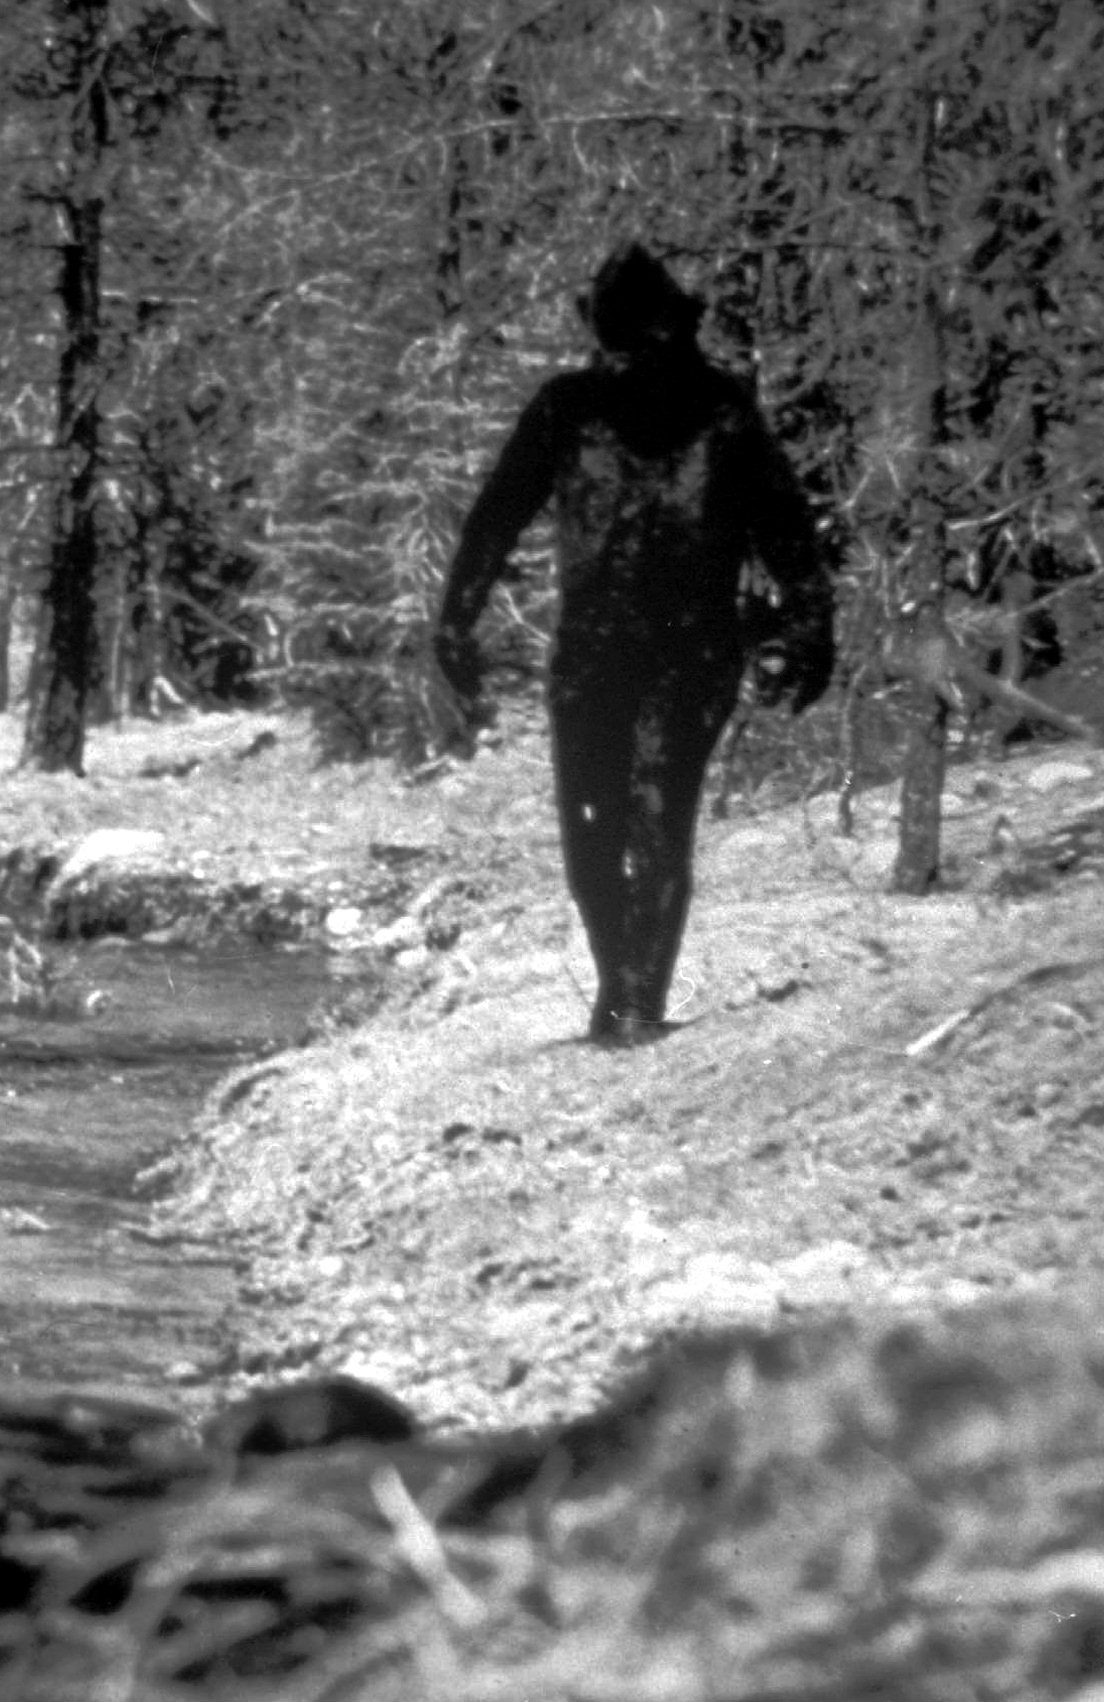 In 2003, when a track team was running in the dense woods of Green Hill Provincial Park, they encountered what they believe was a Big Foot.